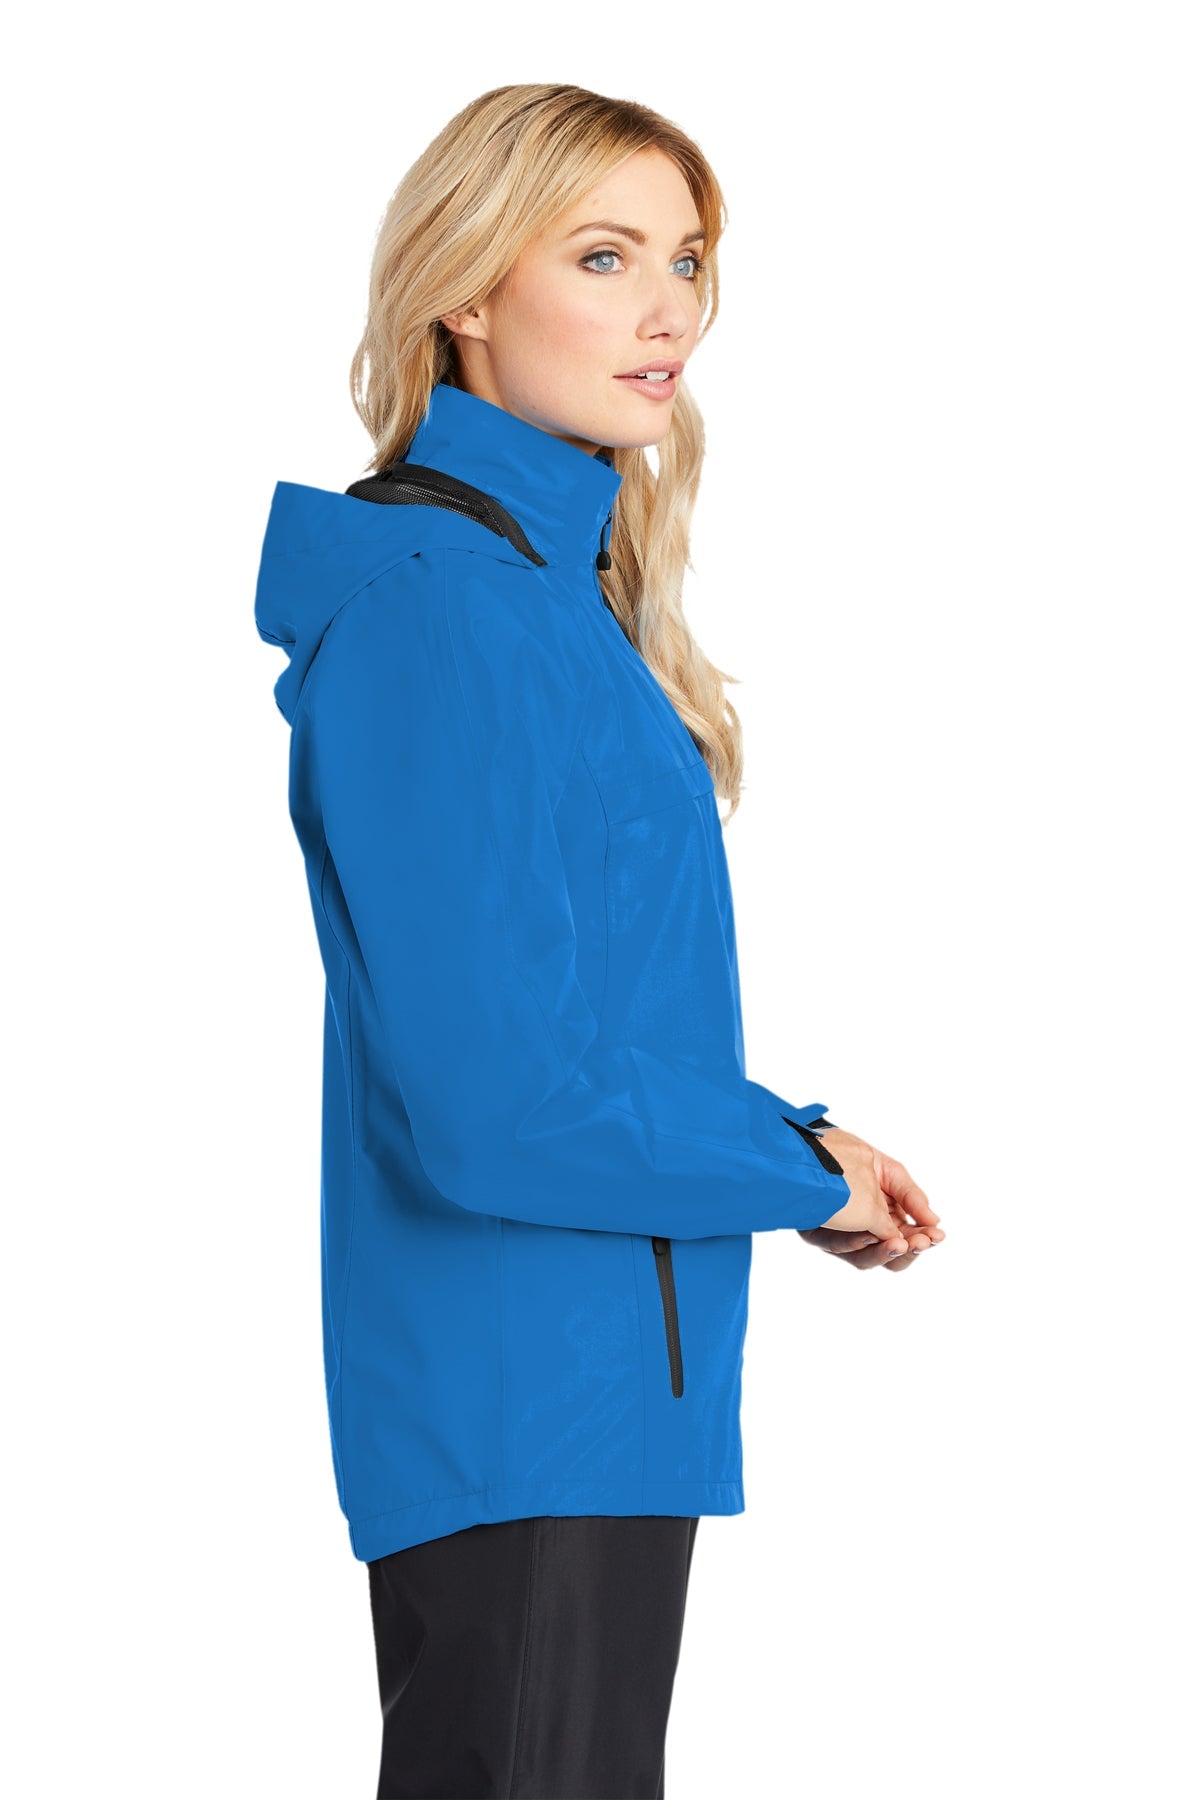 Port Authority Ladies Torrent Customized Waterproof Jackets, Direct Blue